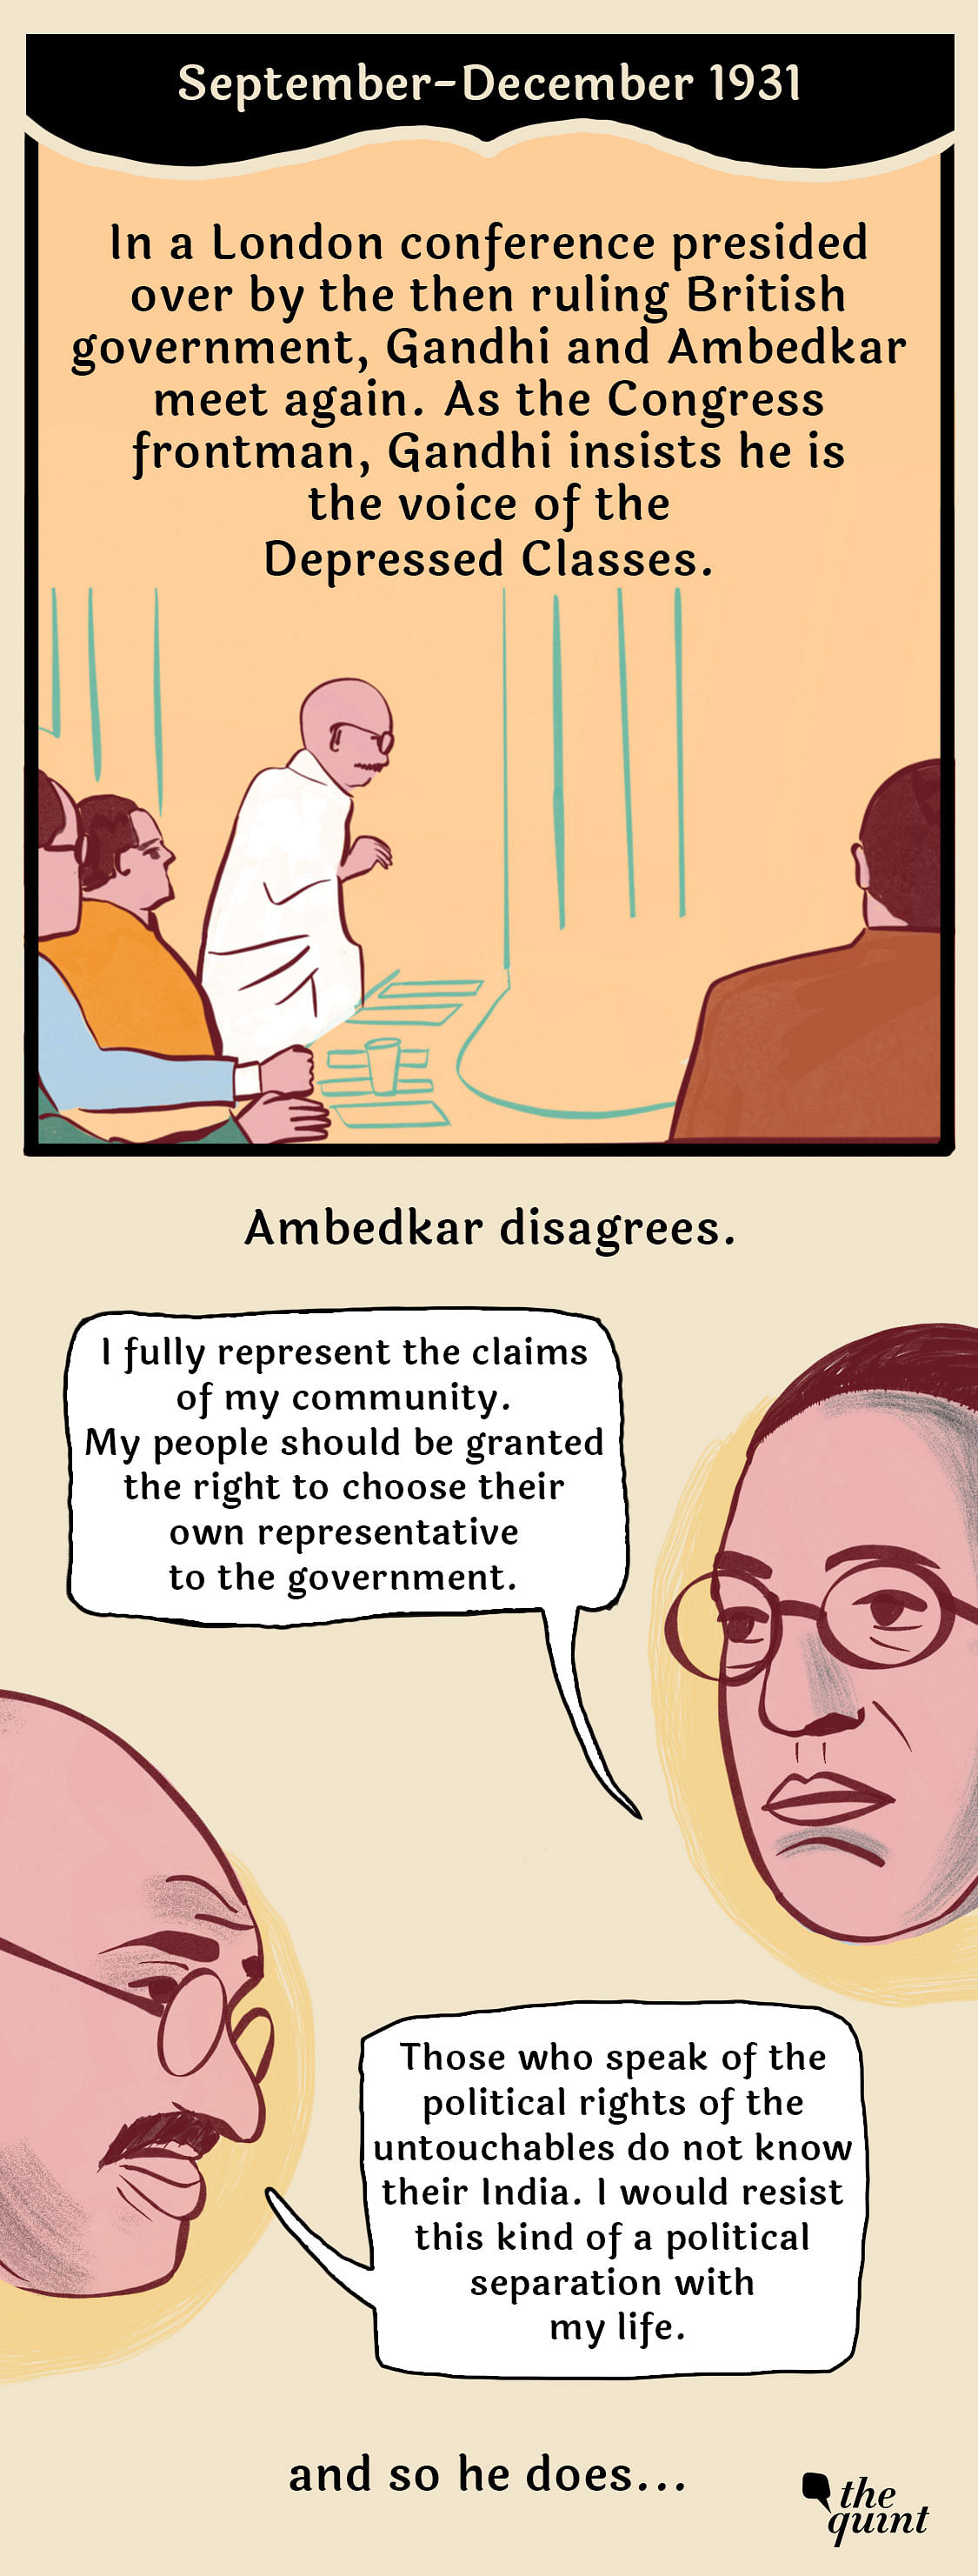 Both Ambedkar and Gandhi had a common dream of eradicating untouchability, but their paths were different.